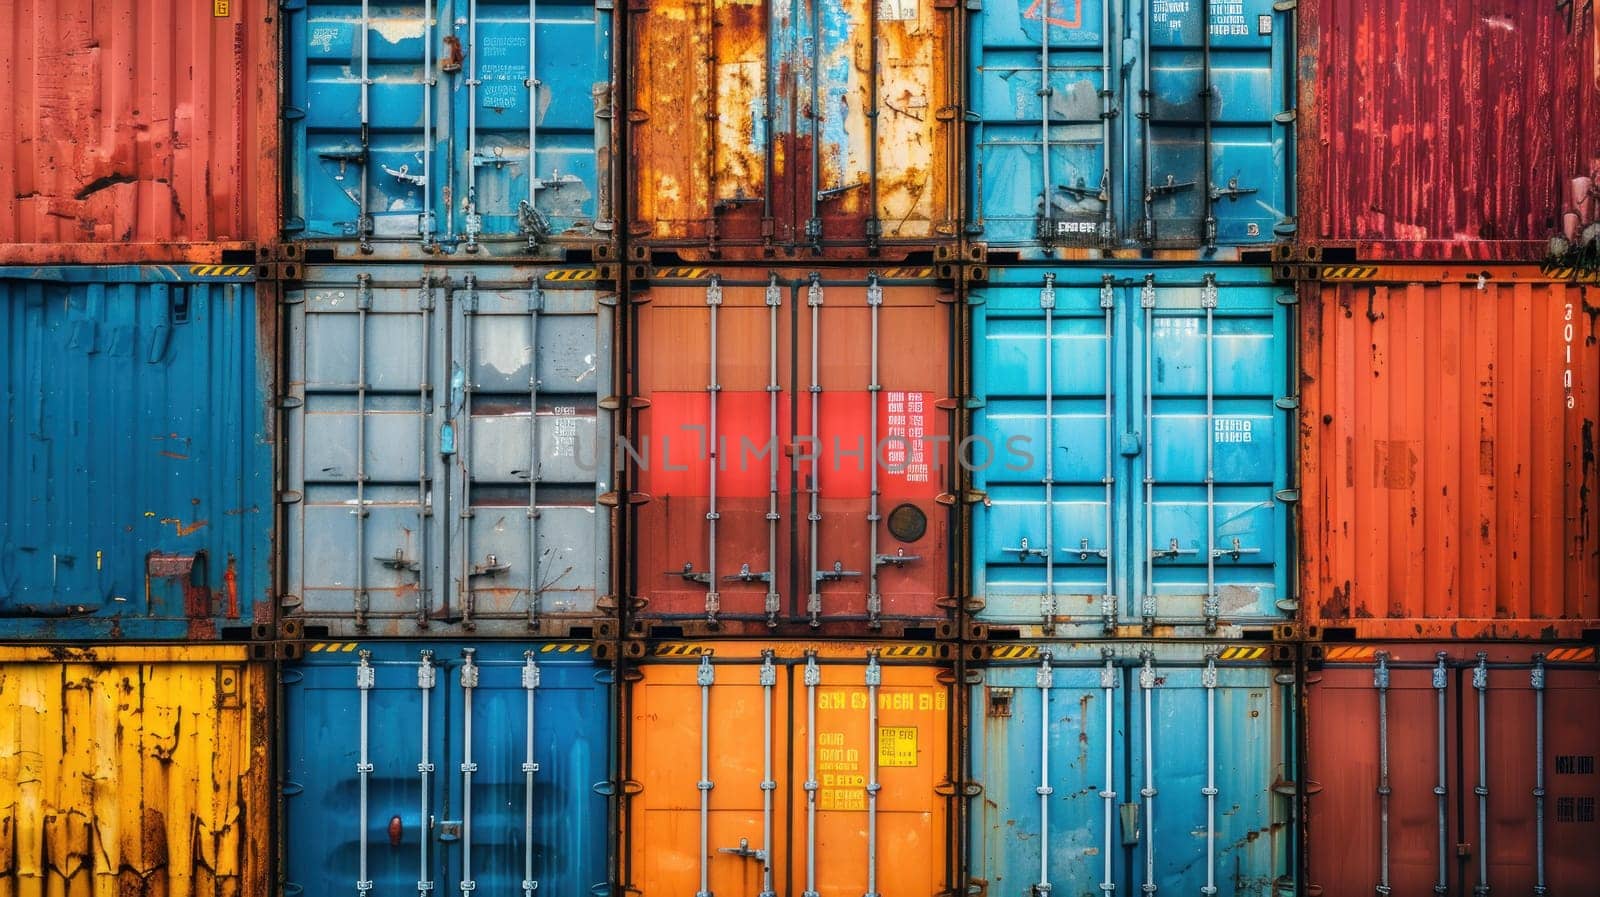 A row of containers with different colors and sizes stacked on top of each other. Concept of organization and structure, as the containers are neatly arranged in a row. The variety of colors